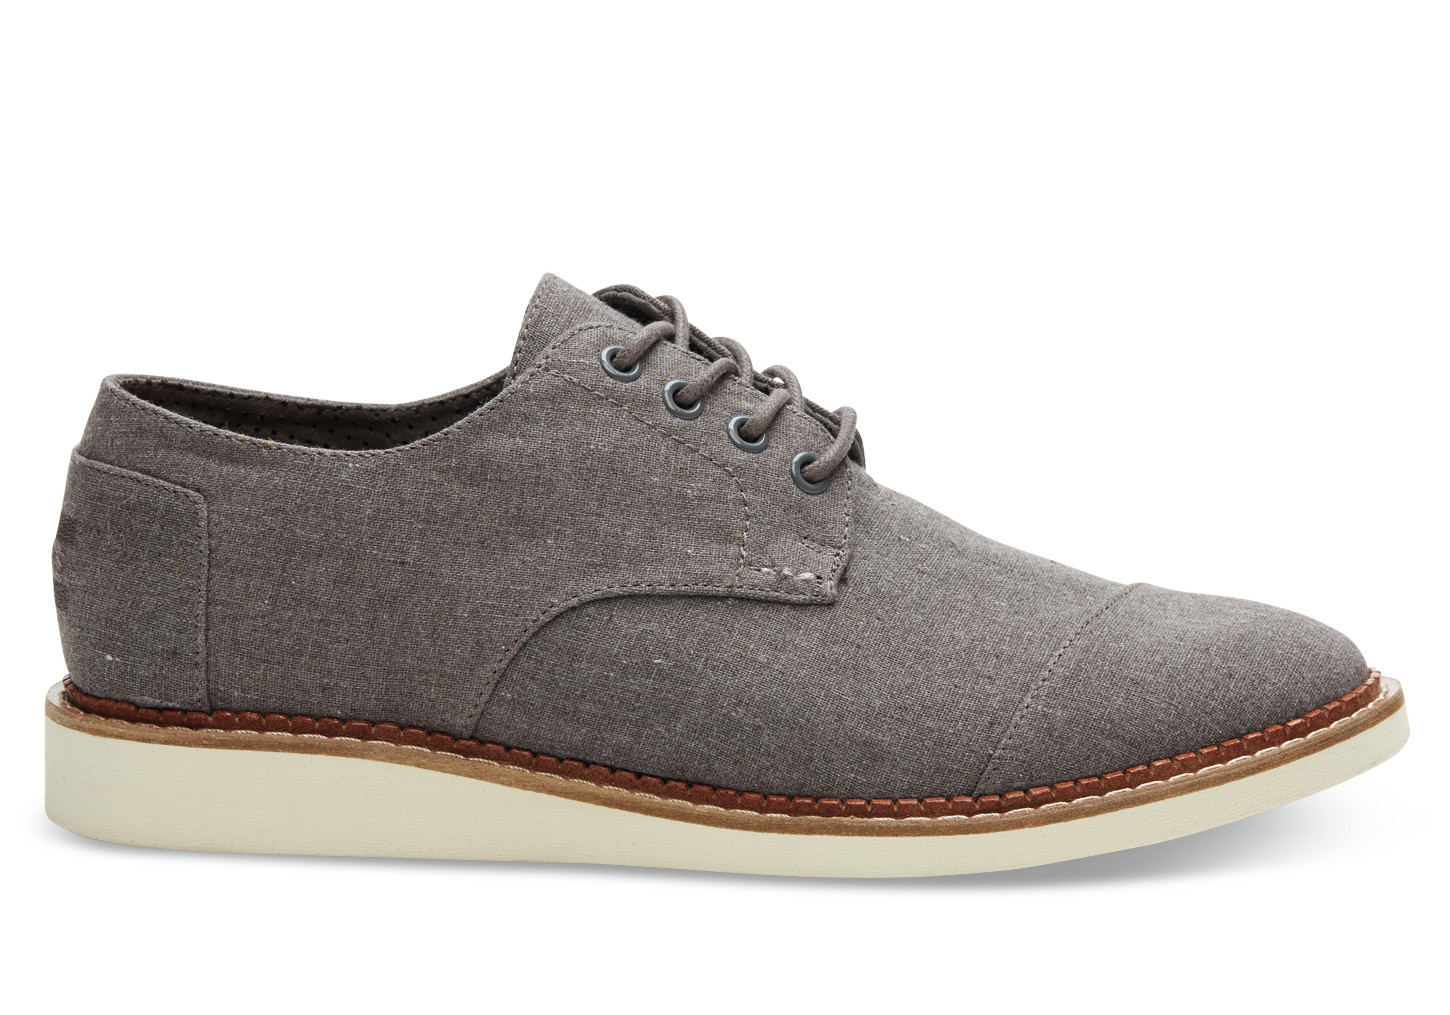 Lyst - Toms Waxed Twill Brogues in Gray for Men